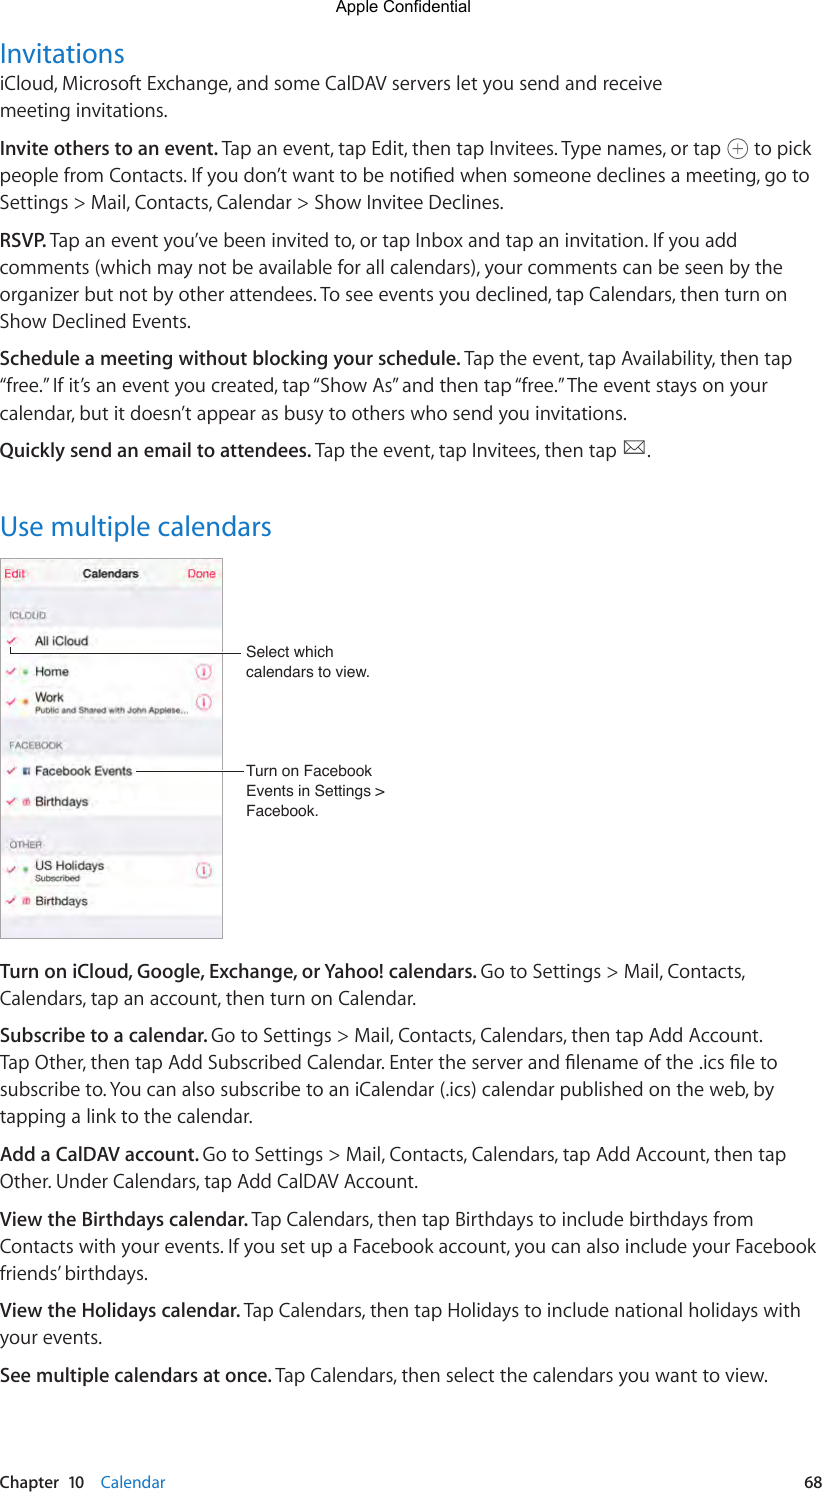 Chapter  10    Calendar  68InvitationsiCloud, Microsoft Exchange, and some CalDAV servers let you send and receive meeting invitations.Invite others to an event. Tap an event, tap Edit, then tap Invitees. Type names, or tap   to pick peoplefromContacts.Ifyoudon’twanttobenotiedwhensomeonedeclinesameeting,gotoSettings &gt; Mail, Contacts, Calendar &gt; Show Invitee Declines.RSVP. Tap an event you’ve been invited to, or tap Inbox and tap an invitation. If you add comments (which may not be available for all calendars), your comments can be seen by the organizer but not by other attendees. To see events you declined, tap Calendars, then turn on Show Declined Events.Schedule a meeting without blocking your schedule. Tap the event, tap Availability, then tap “free.” If it’s an event you created, tap “Show As” and then tap “free.” The event stays on your calendar, but it doesn’t appear as busy to others who send you invitations.Quickly send an email to attendees. Tap the event, tap Invitees, then tap  .Use multiple calendarsTurn on Facebook Events in Settings &gt; Facebook.Turn on Facebook Events in Settings &gt; Facebook.Select which calendars to view.Select which calendars to view.Turn on iCloud, Google, Exchange, or Yahoo! calendars. Go to Settings &gt; Mail, Contacts, Calendars, tap an account, then turn on Calendar.Subscribe to a calendar. Go to Settings &gt; Mail, Contacts, Calendars, then tap Add Account. TapOther,thentapAddSubscribedCalendar.Entertheserverandlenameofthe.icsletosubscribe to. You can also subscribe to an iCalendar (.ics) calendar published on the web, by tapping a link to the calendar.Add a CalDAV account. Go to Settings &gt; Mail, Contacts, Calendars, tap Add Account, then tap Other. Under Calendars, tap Add CalDAV Account.View the Birthdays calendar. Tap Calendars, then tap Birthdays to include birthdays from Contacts with your events. If you set up a Facebook account, you can also include your Facebook friends’ birthdays.View the Holidays calendar. Tap Calendars, then tap Holidays to include national holidays with your events.See multiple calendars at once. Tap Calendars, then select the calendars you want to view.Apple Confidential